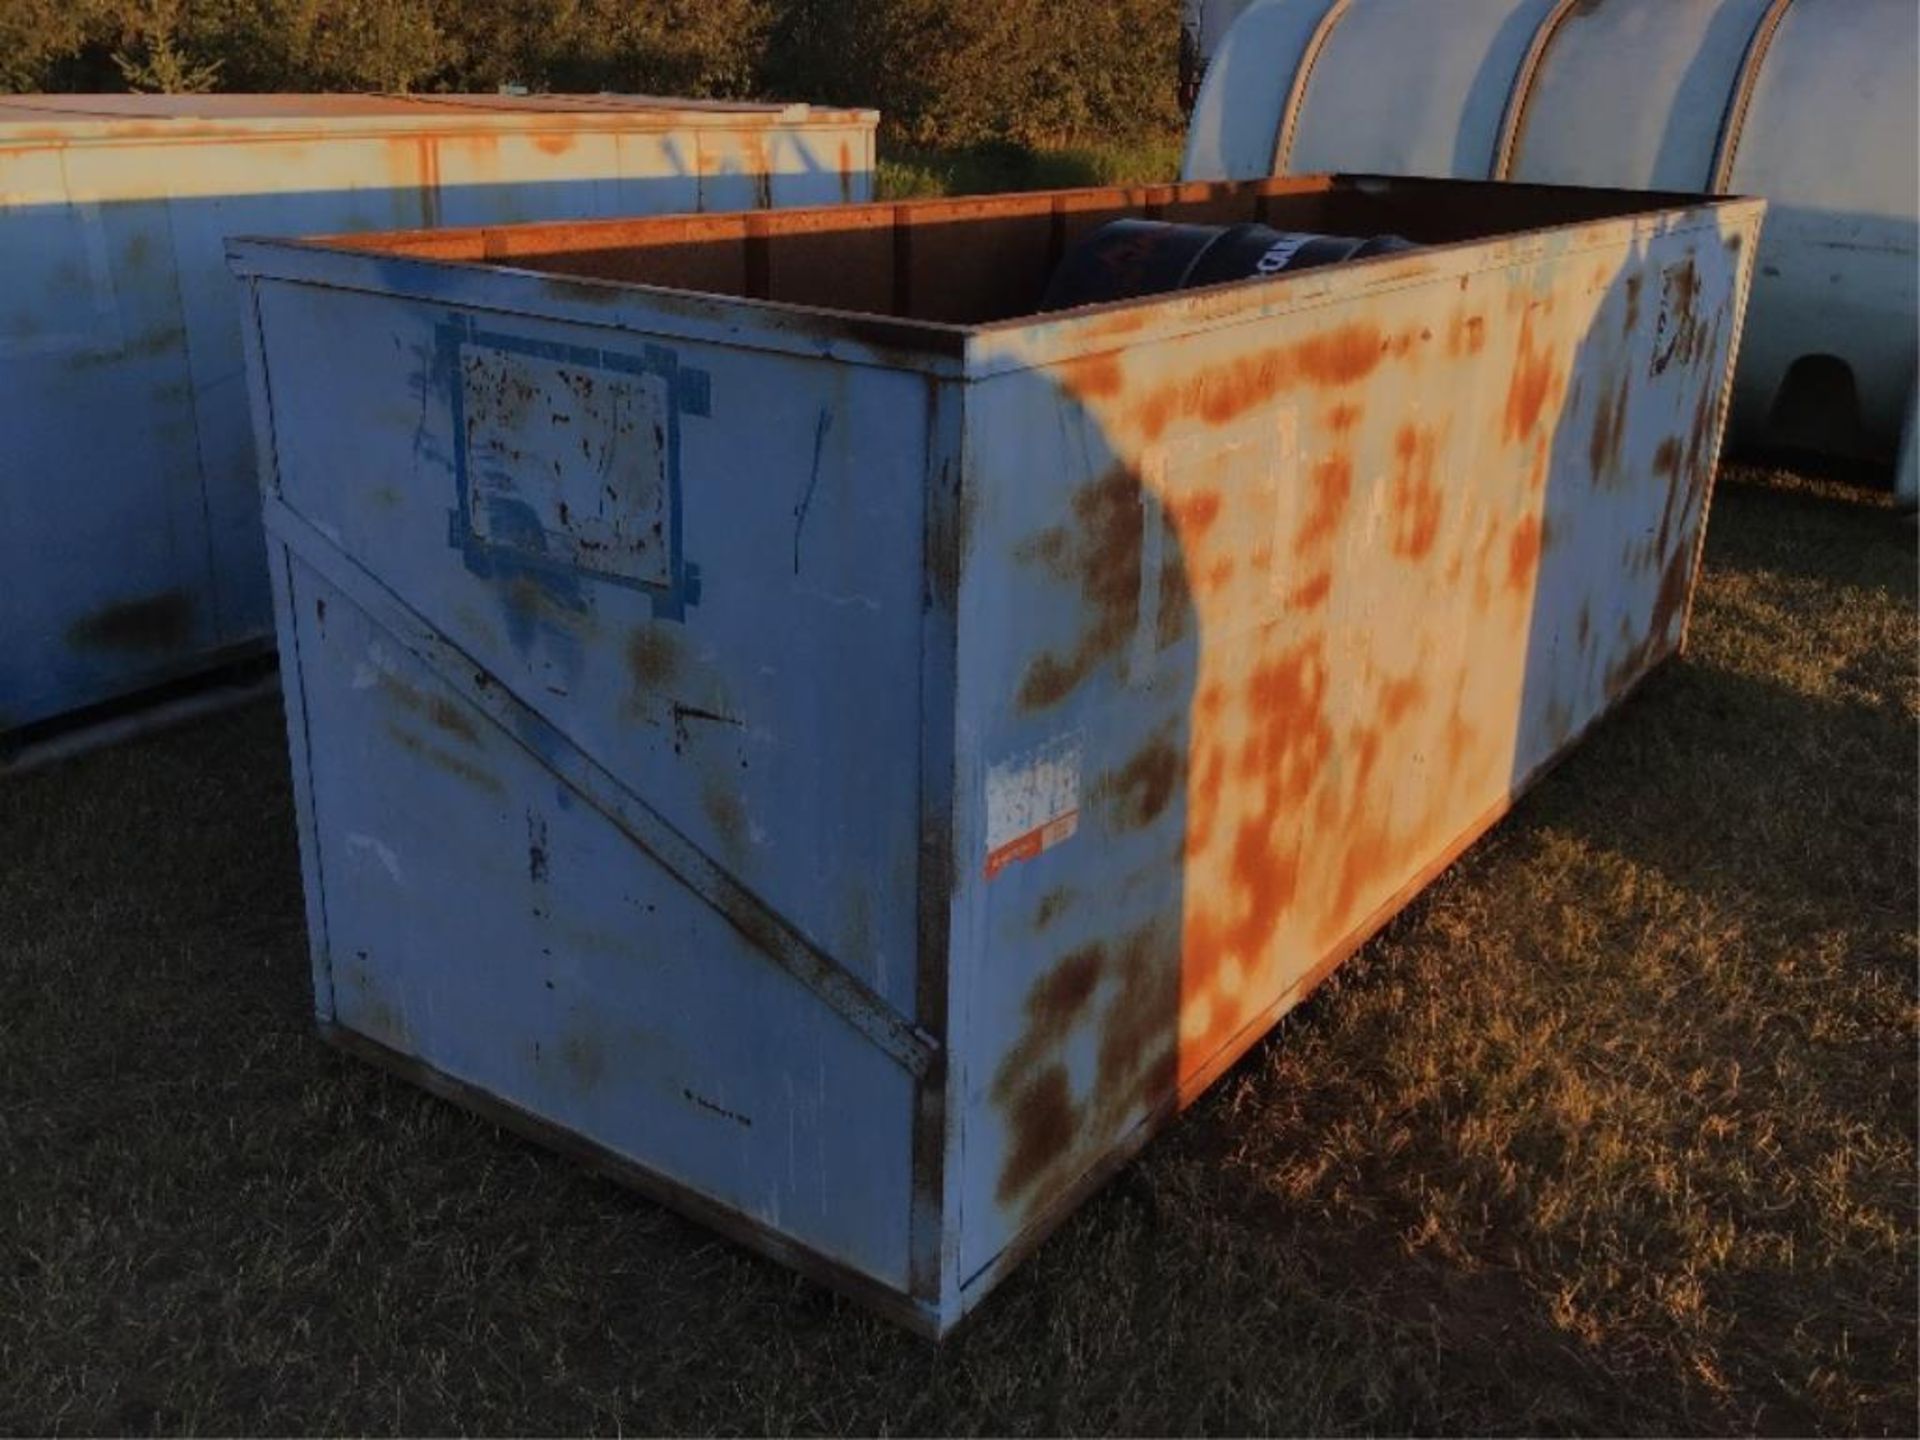 Steel Shipping/Storage Contailer w/Barrels